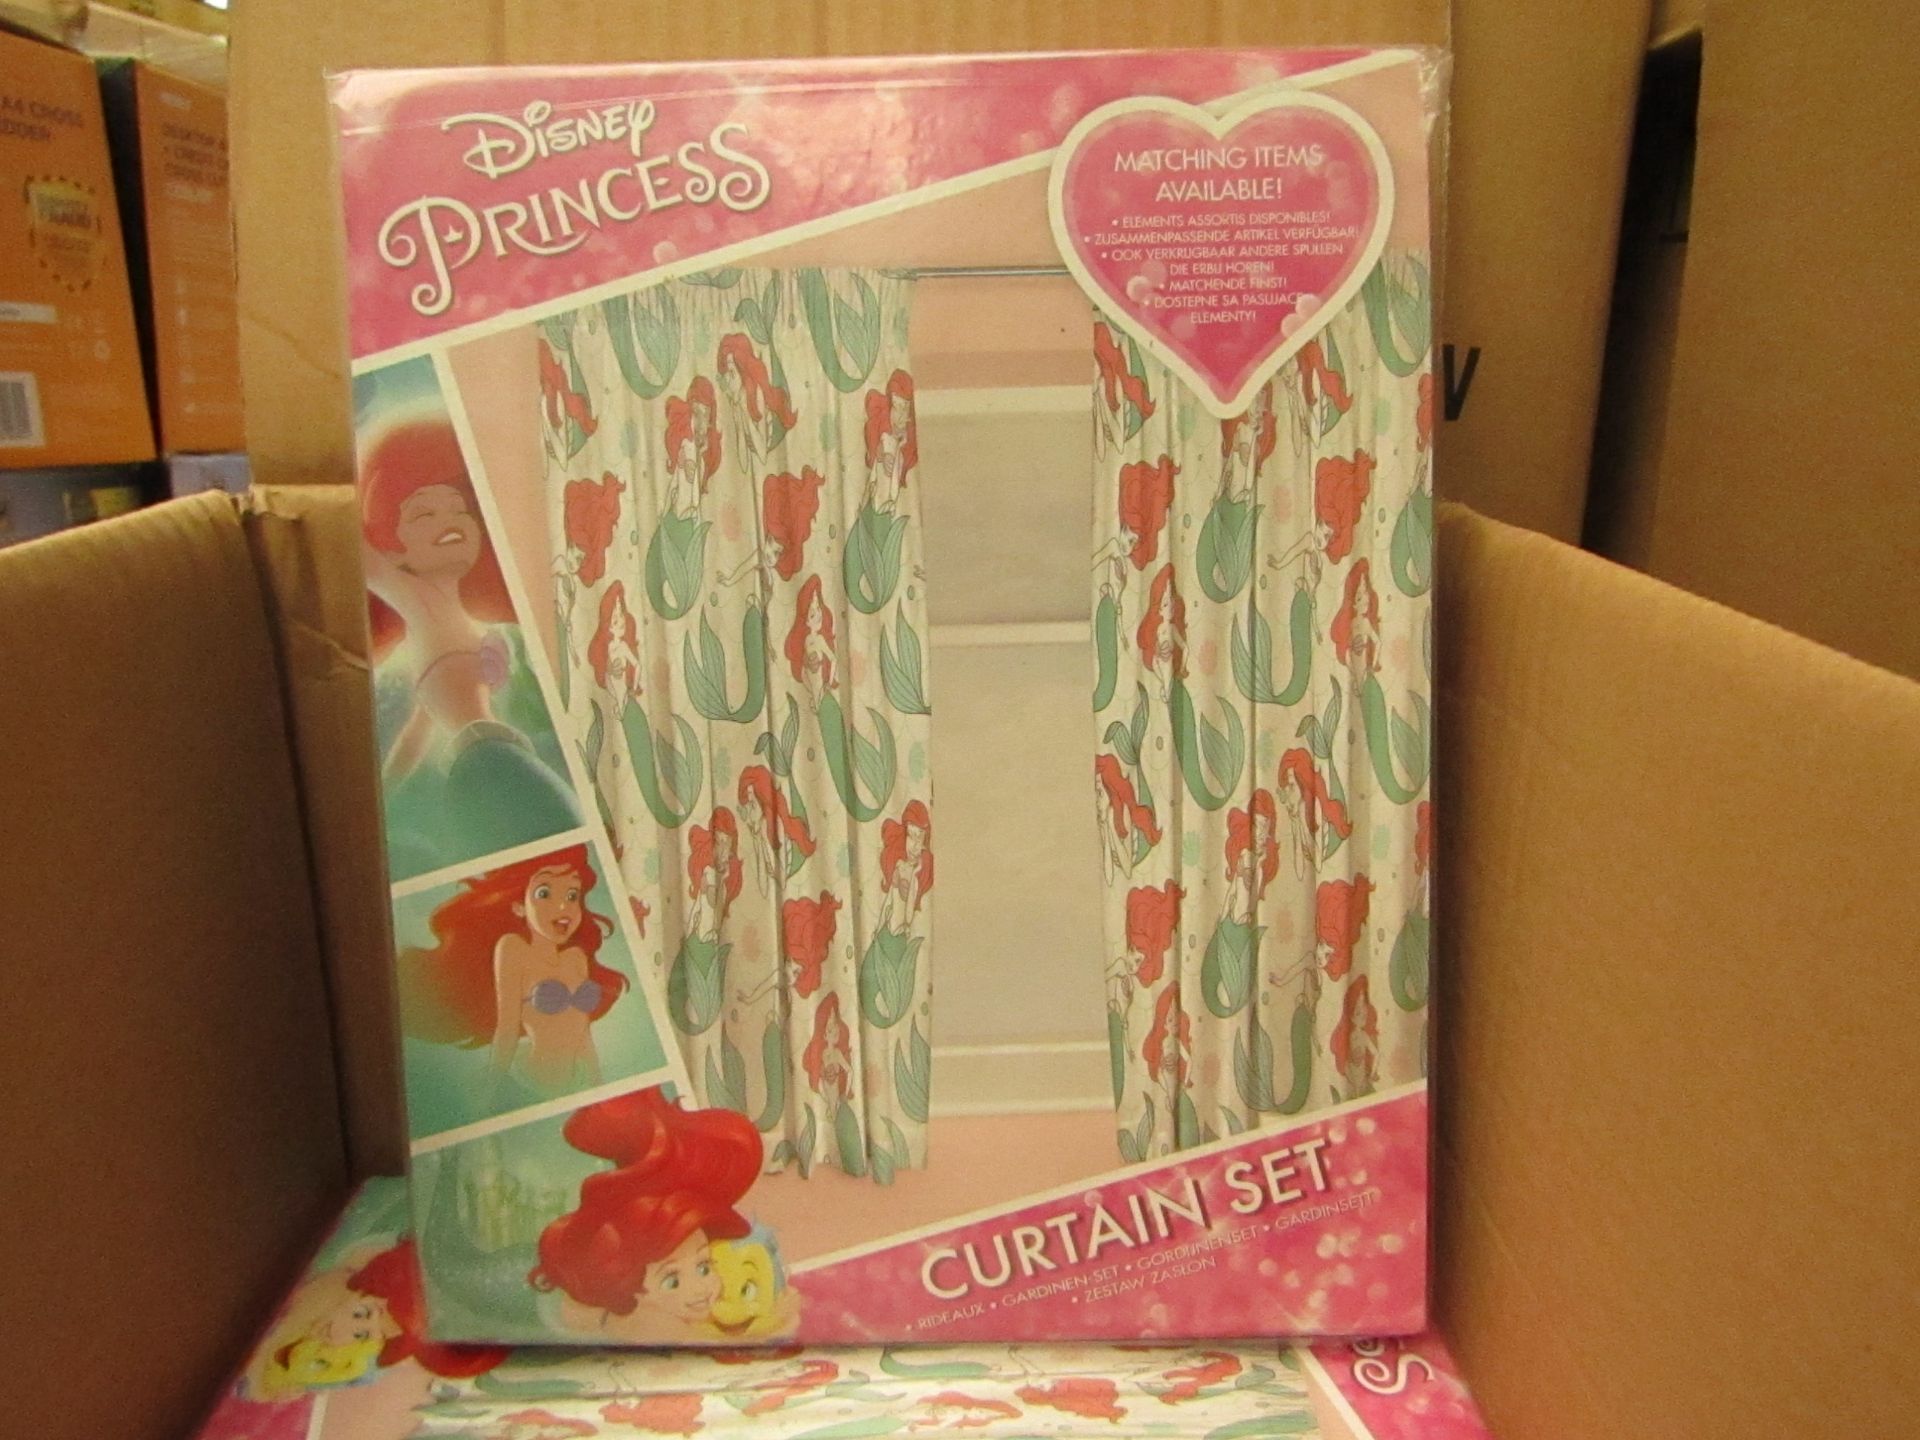 1 x Disney Princess Curtain Set 66" x 54" without Tie Backs - New & Packaged